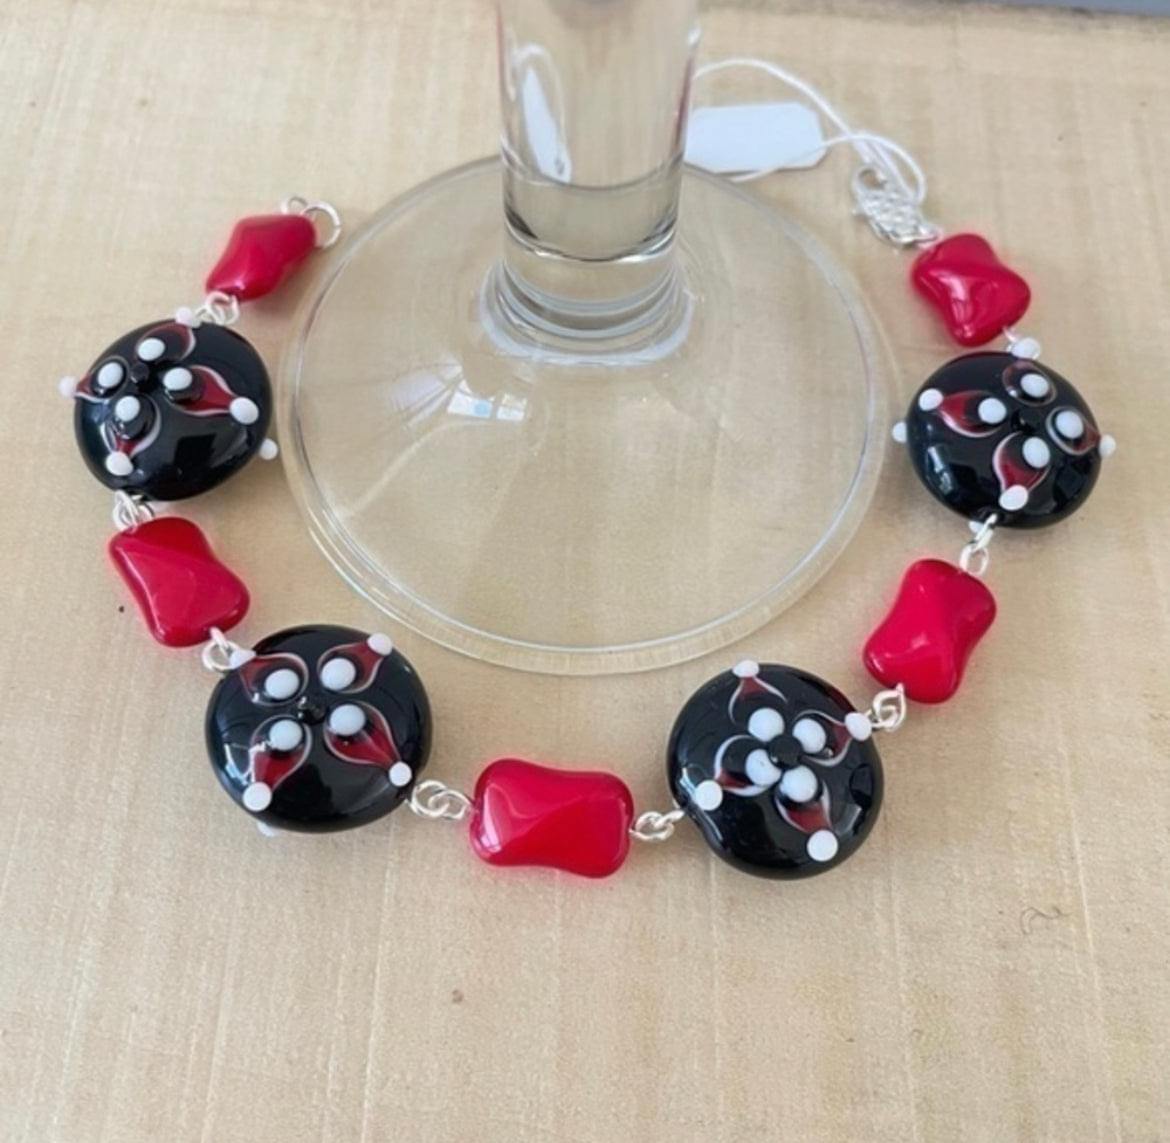 Chunky Multicolor Glass Bead Bracelet 8.5" Red Black White Drama Hand-Linked Textured